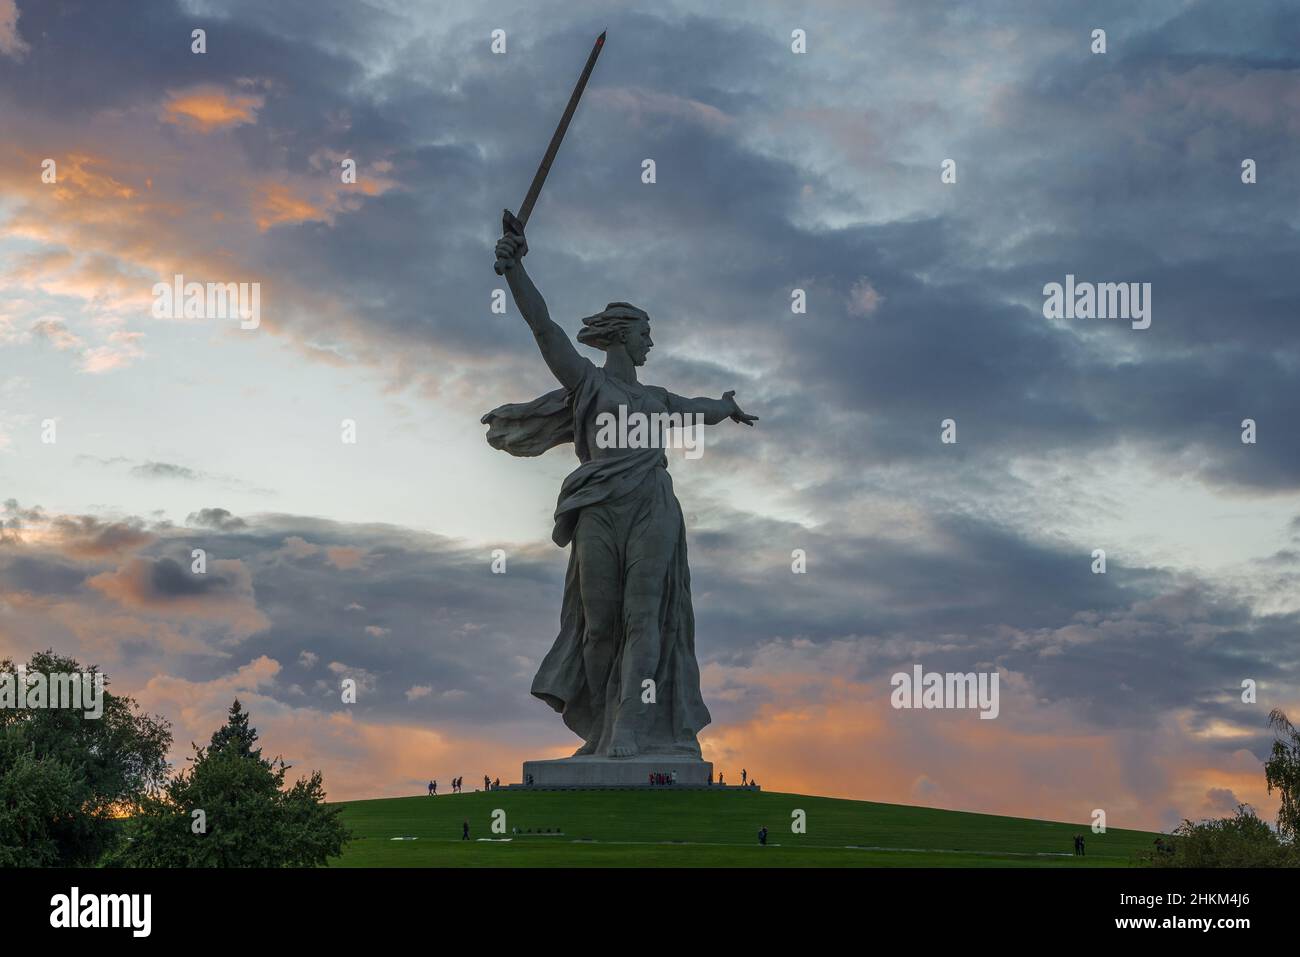 VOLGOGRAD, RUSSIA - SEPTEMBER 19, 2021: Sculpture 'The Motherland Calls!' against the background of a gloomy sunset sky. Memorial complex 'Mamaev Kurg Stock Photo